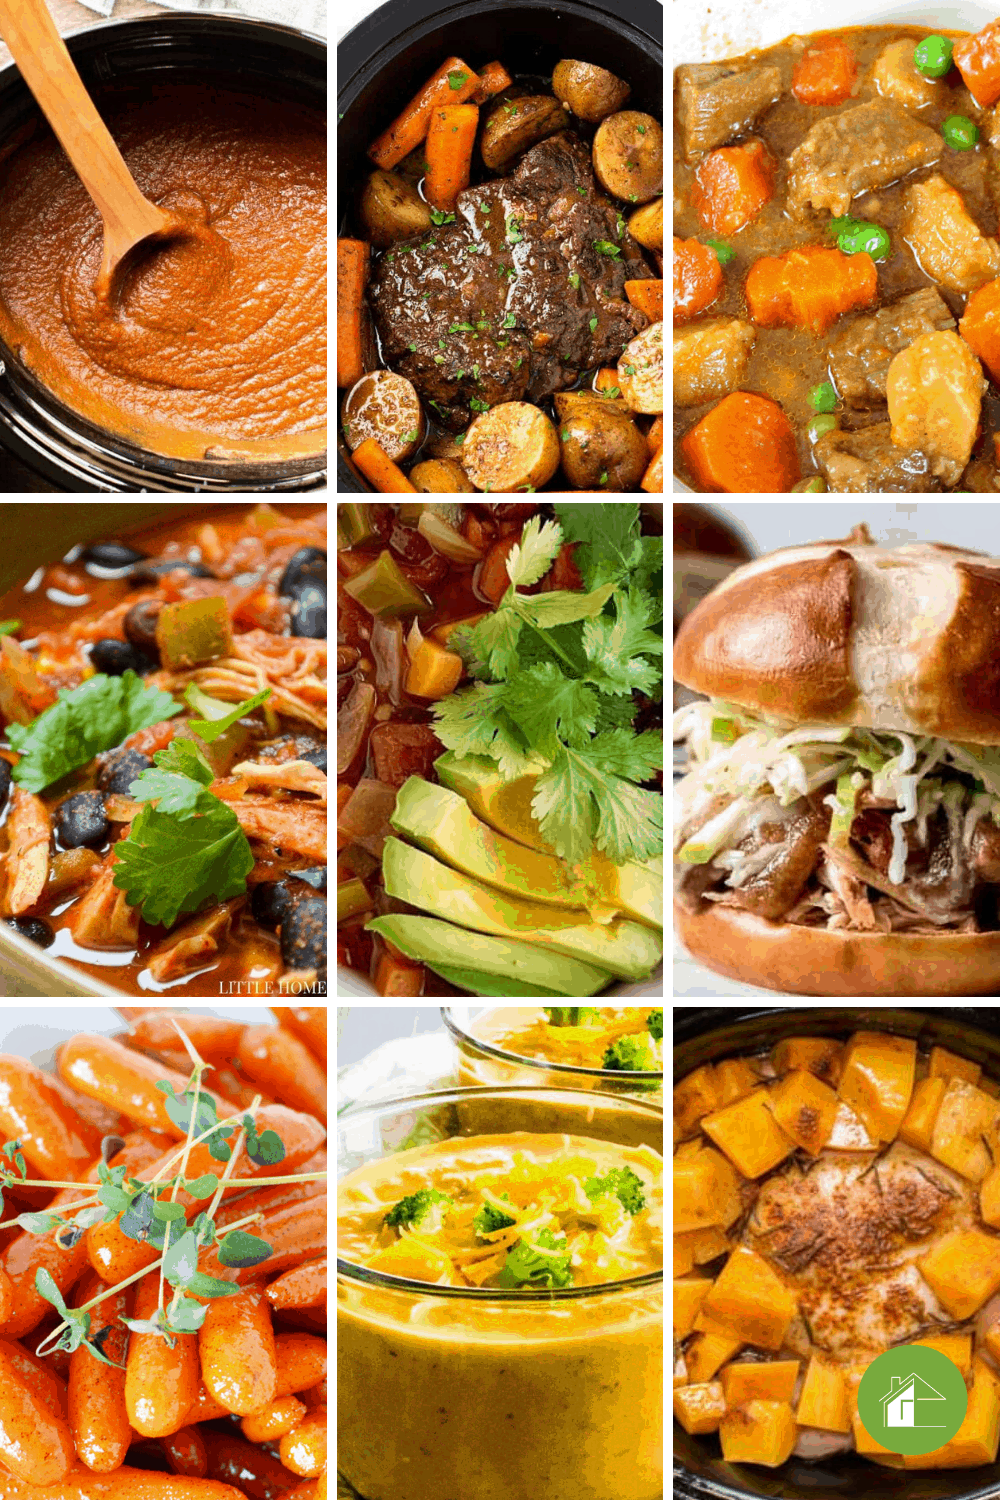 Get all the fall flavors you love with these slow cooker recipes! From fall desserts to hearty stews, there’s something for every taste. #fallcrocopotrecipes #crockpotrecipes #fallrecipes via @mystayathome